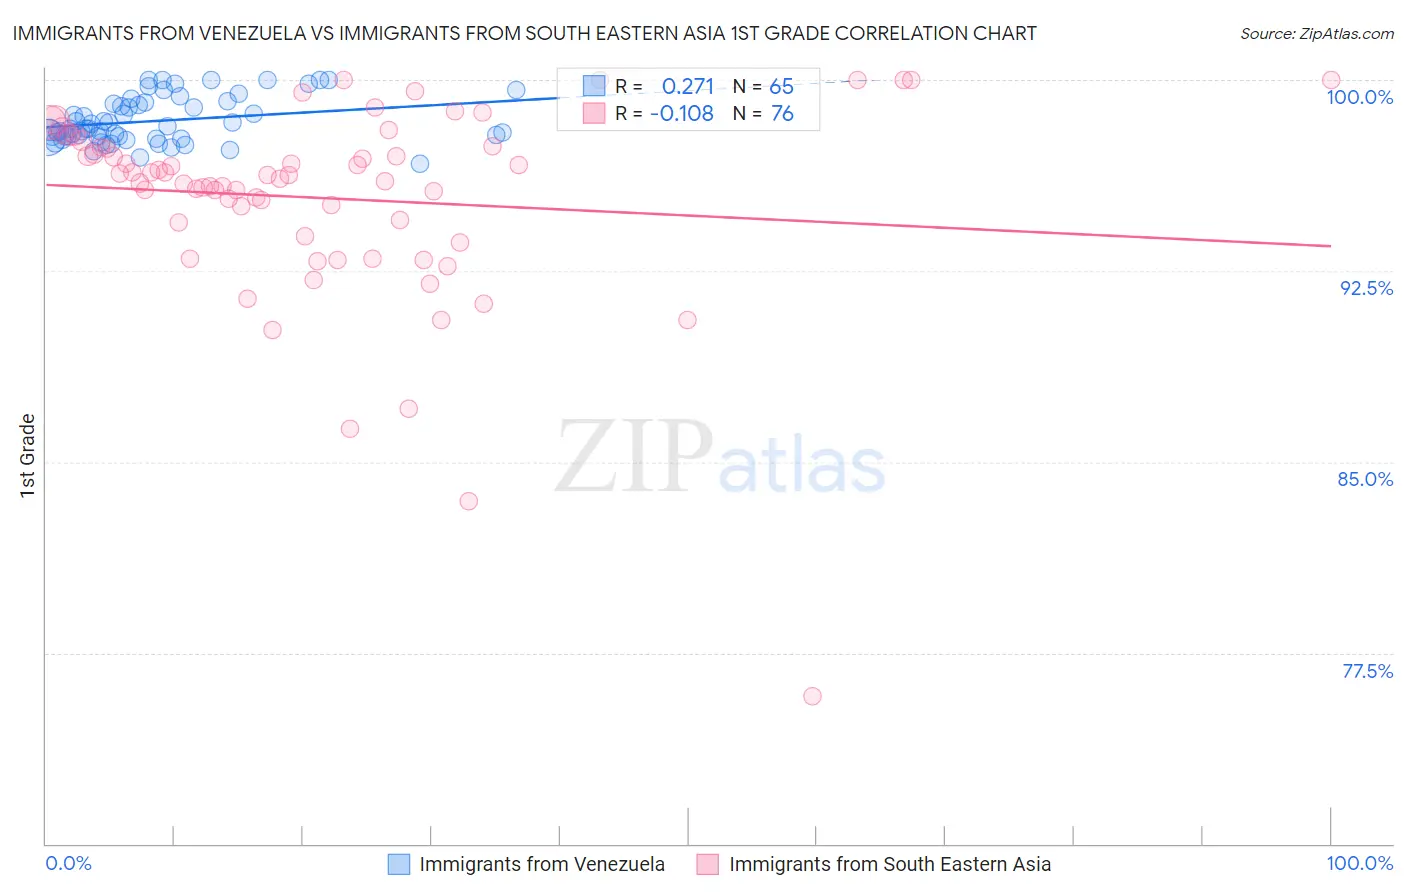 Immigrants from Venezuela vs Immigrants from South Eastern Asia 1st Grade